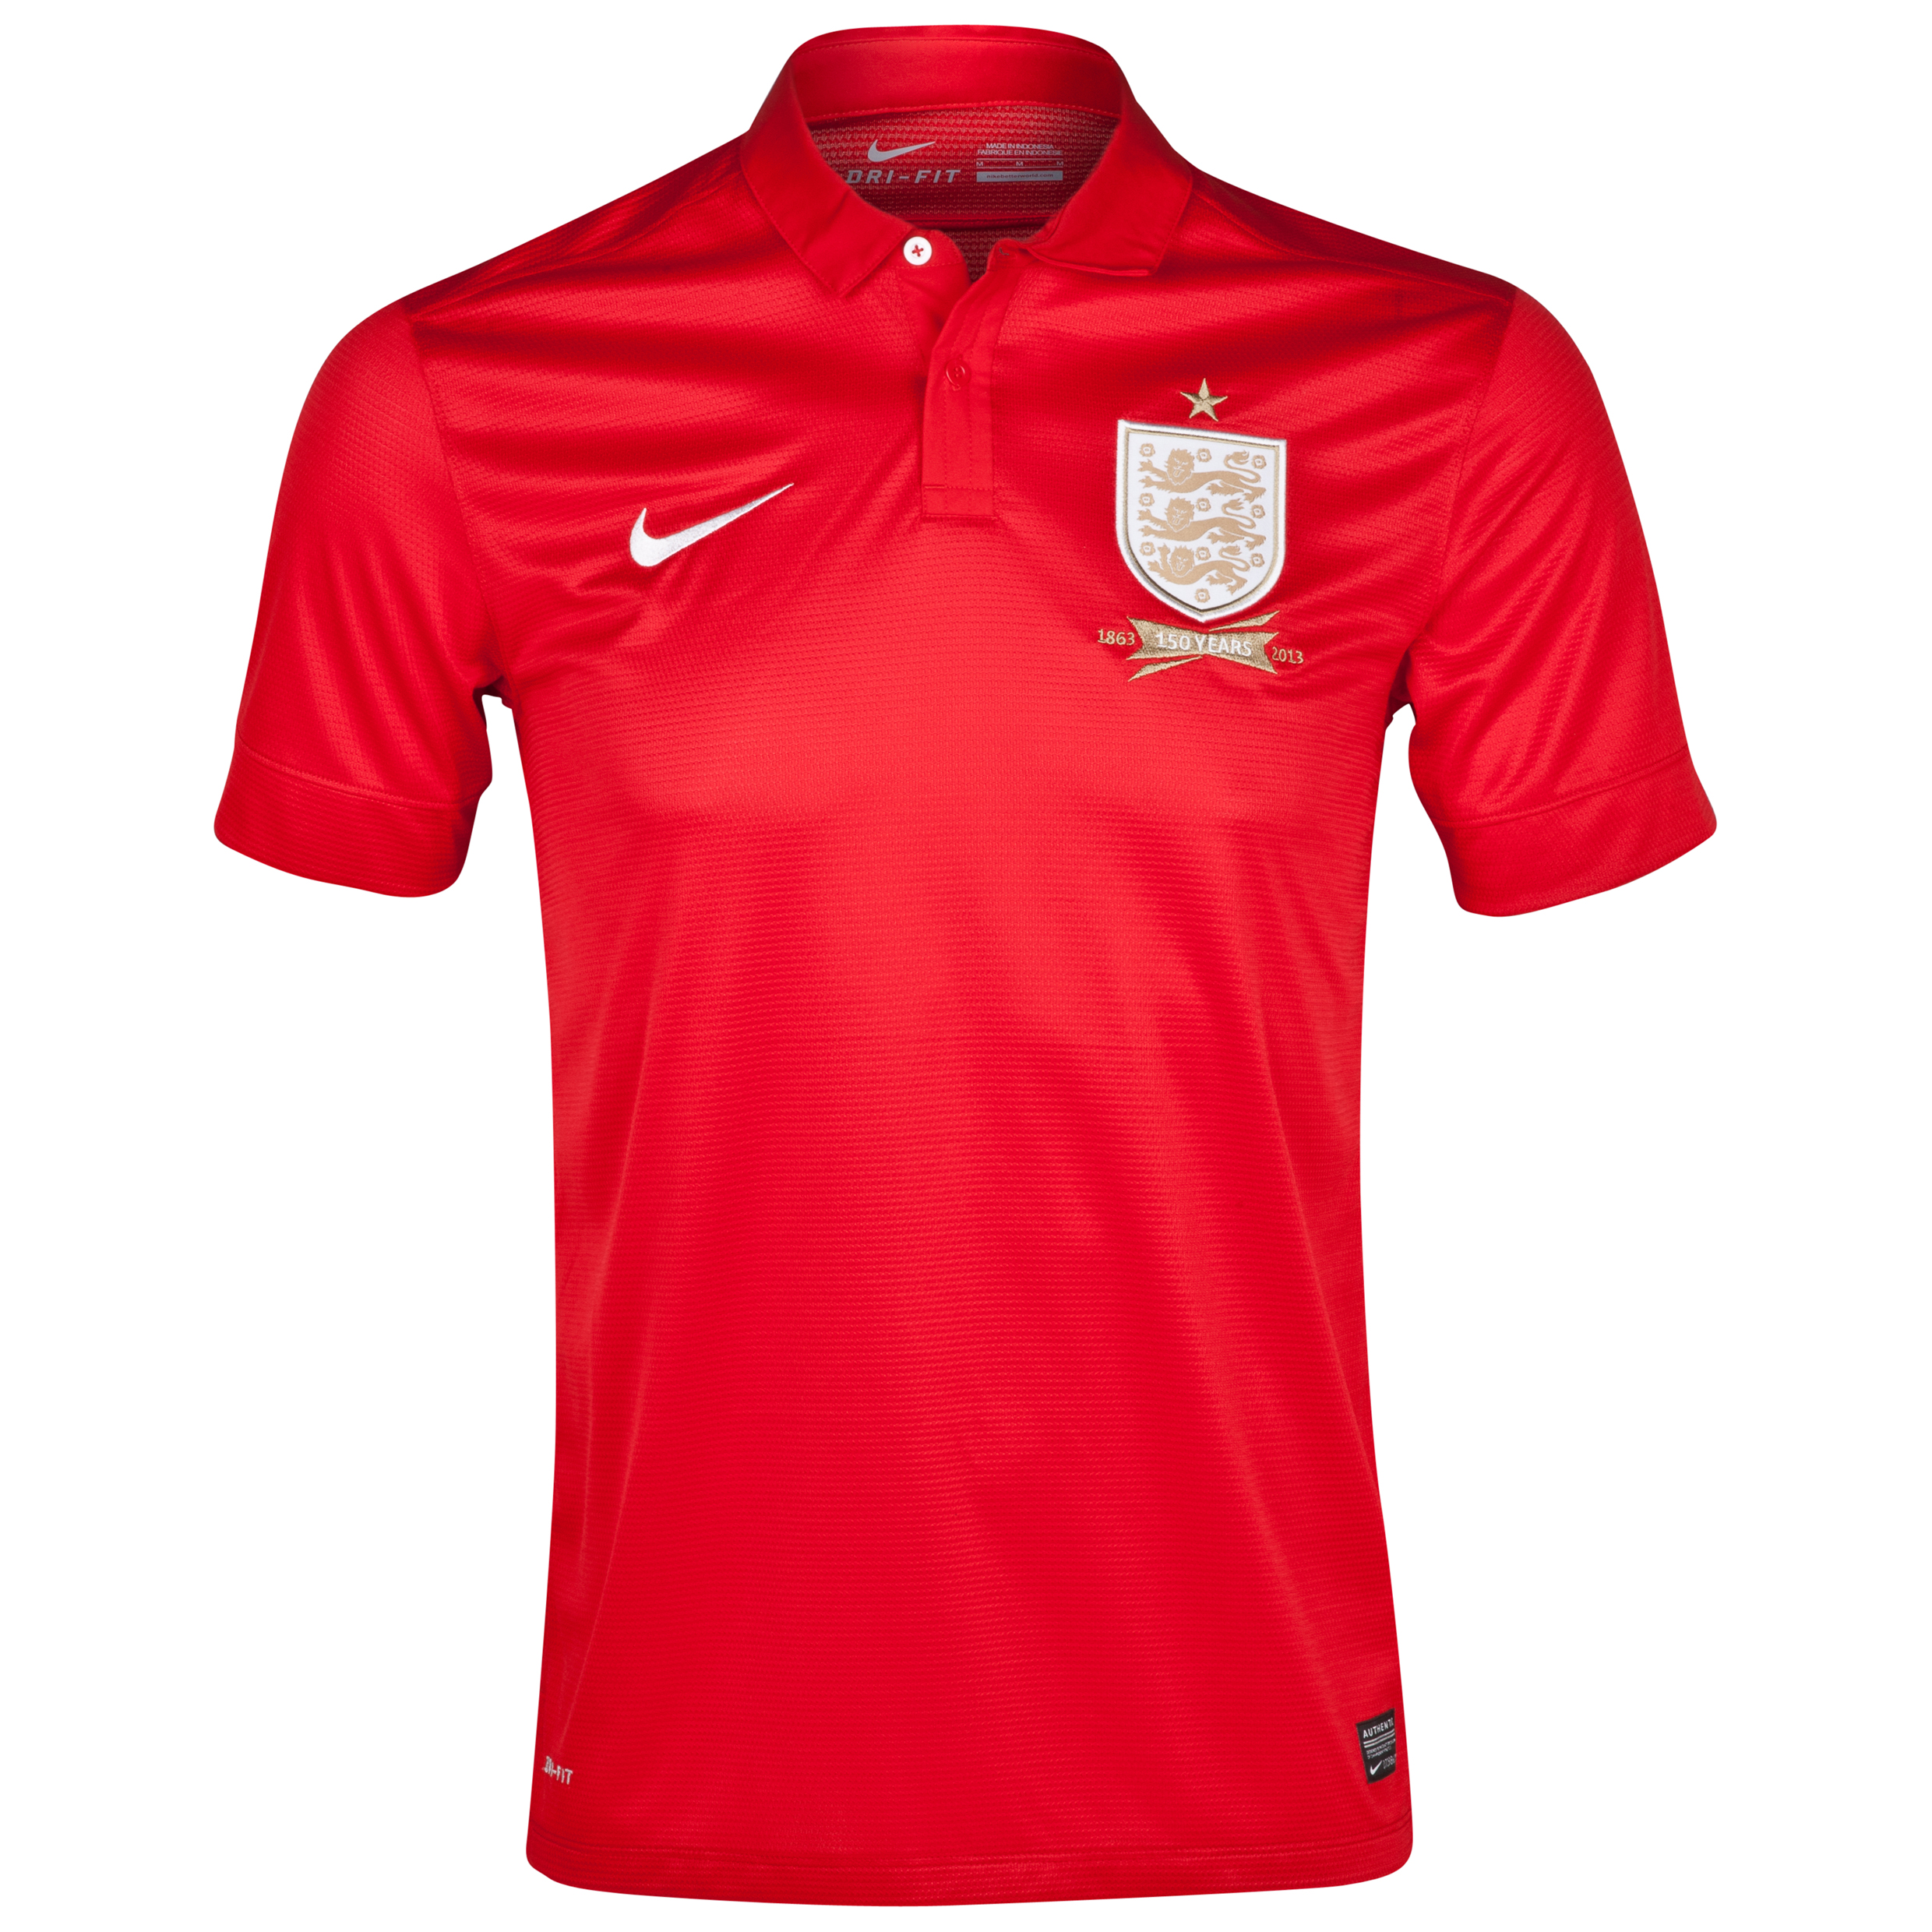 http://images.kitbag.com/kb-130011.jpg?width=400&height=400&quality=95?width=400&height=400&quality=95